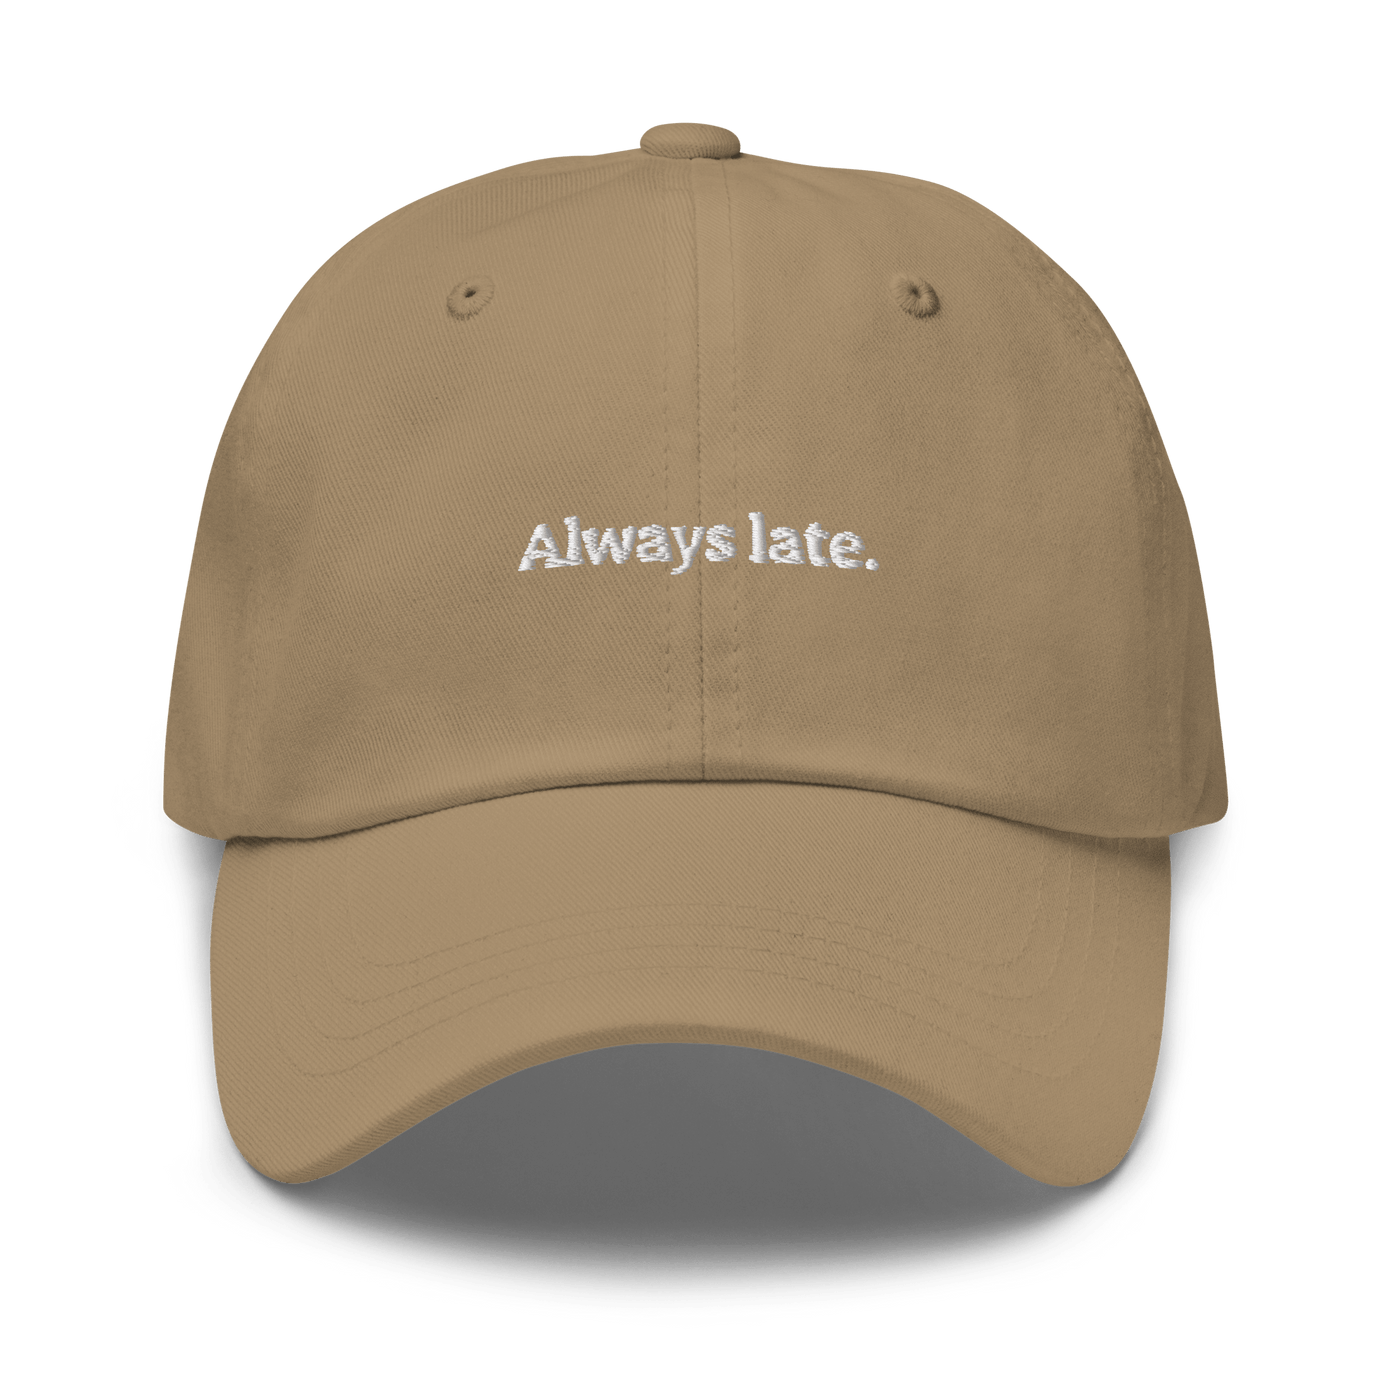 Always Late. Dad hat - Khaki - - Just Another Cap Store